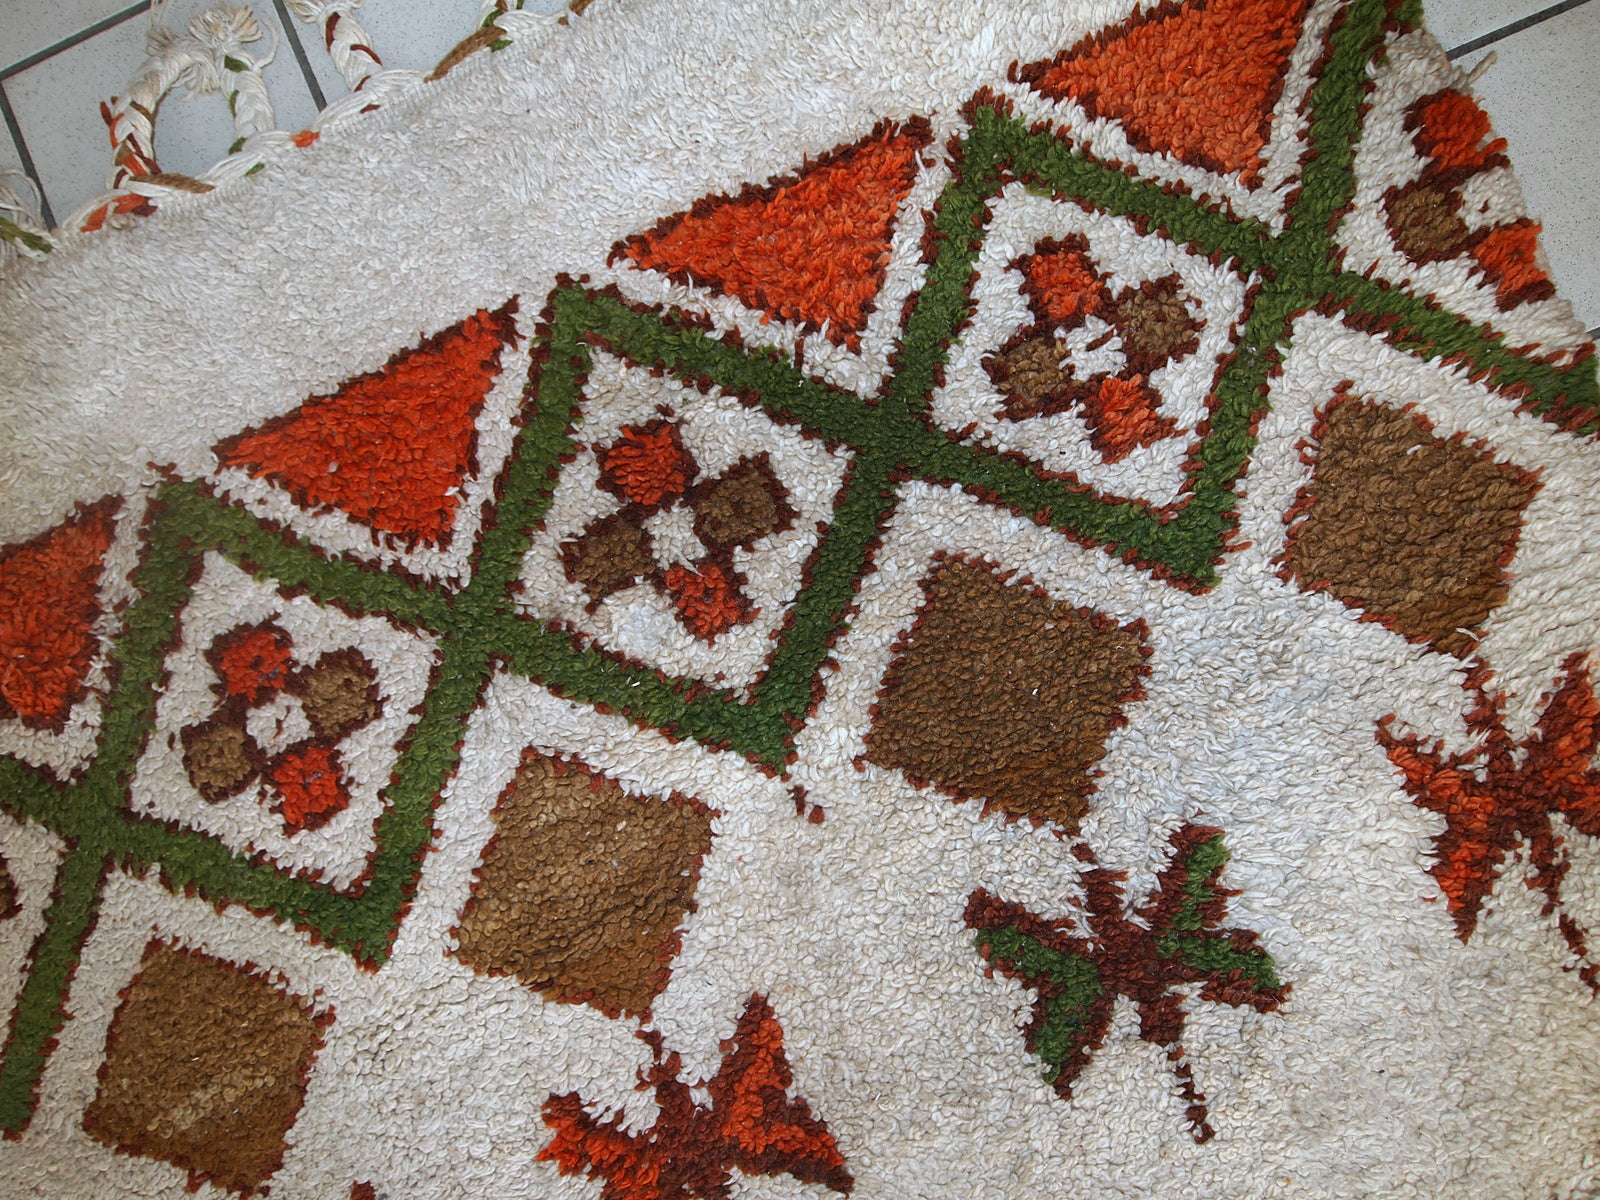 Handmade vintage Moroccan Berber rug made in white wool. The rug is very heavy and thick. It is from the middle of 20th century in original condition, has some low pile and age discolorations.